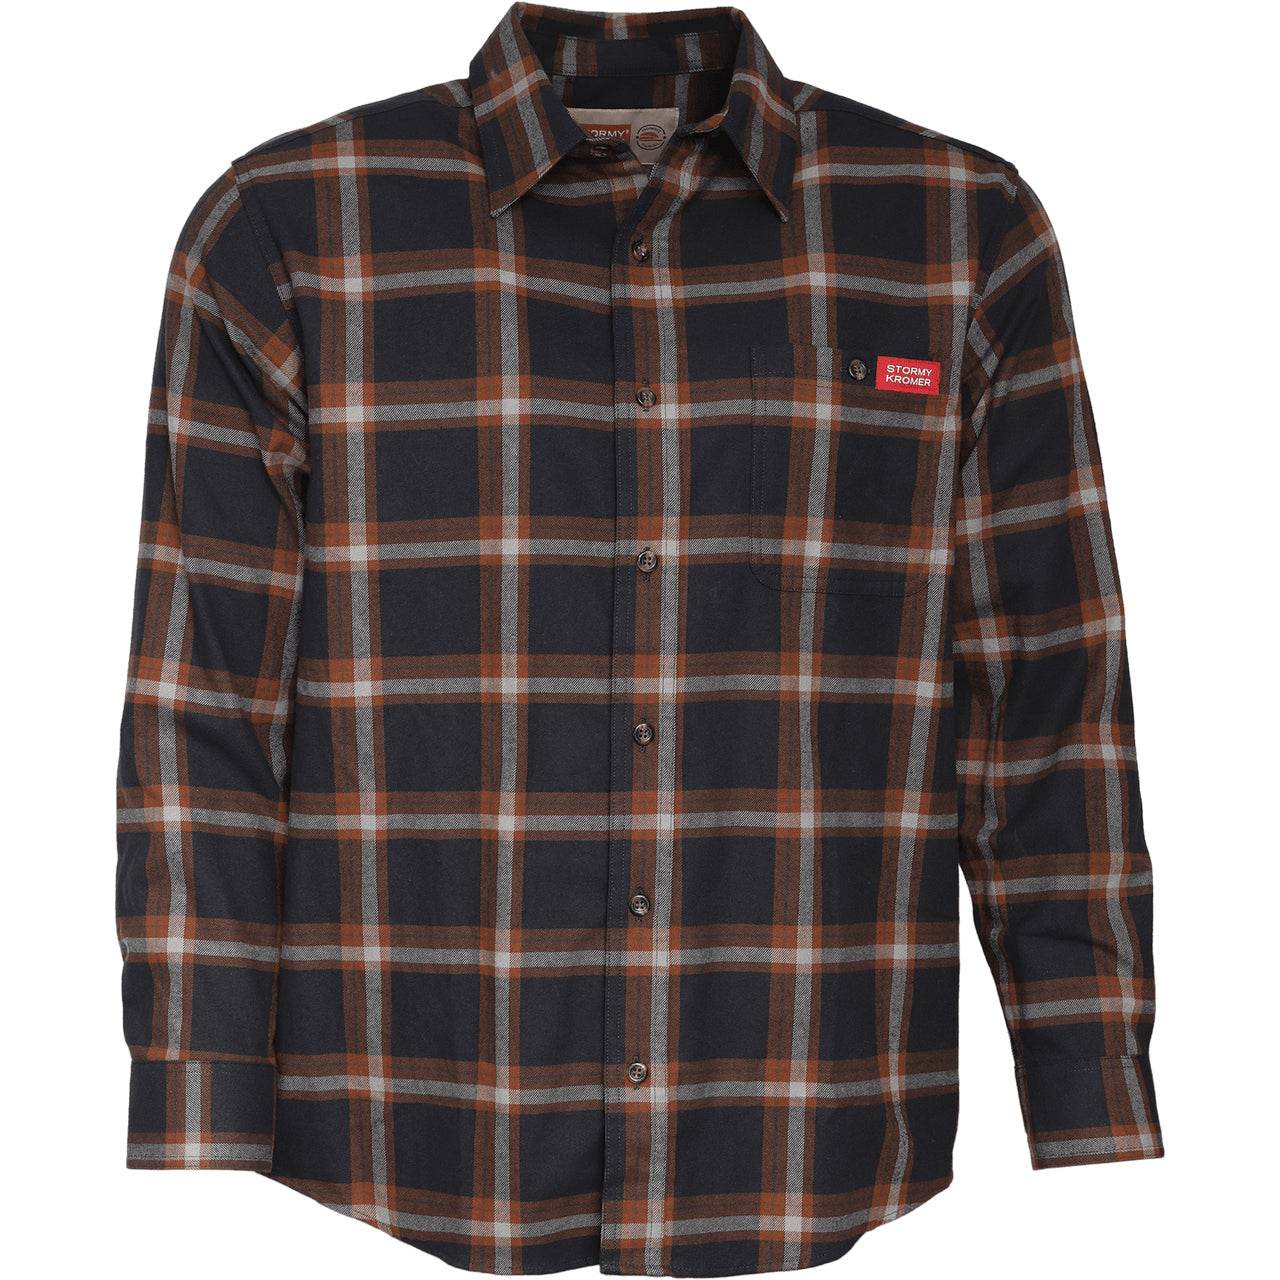 Stormy Kromer Flannel Shirt in Campfire Plaid